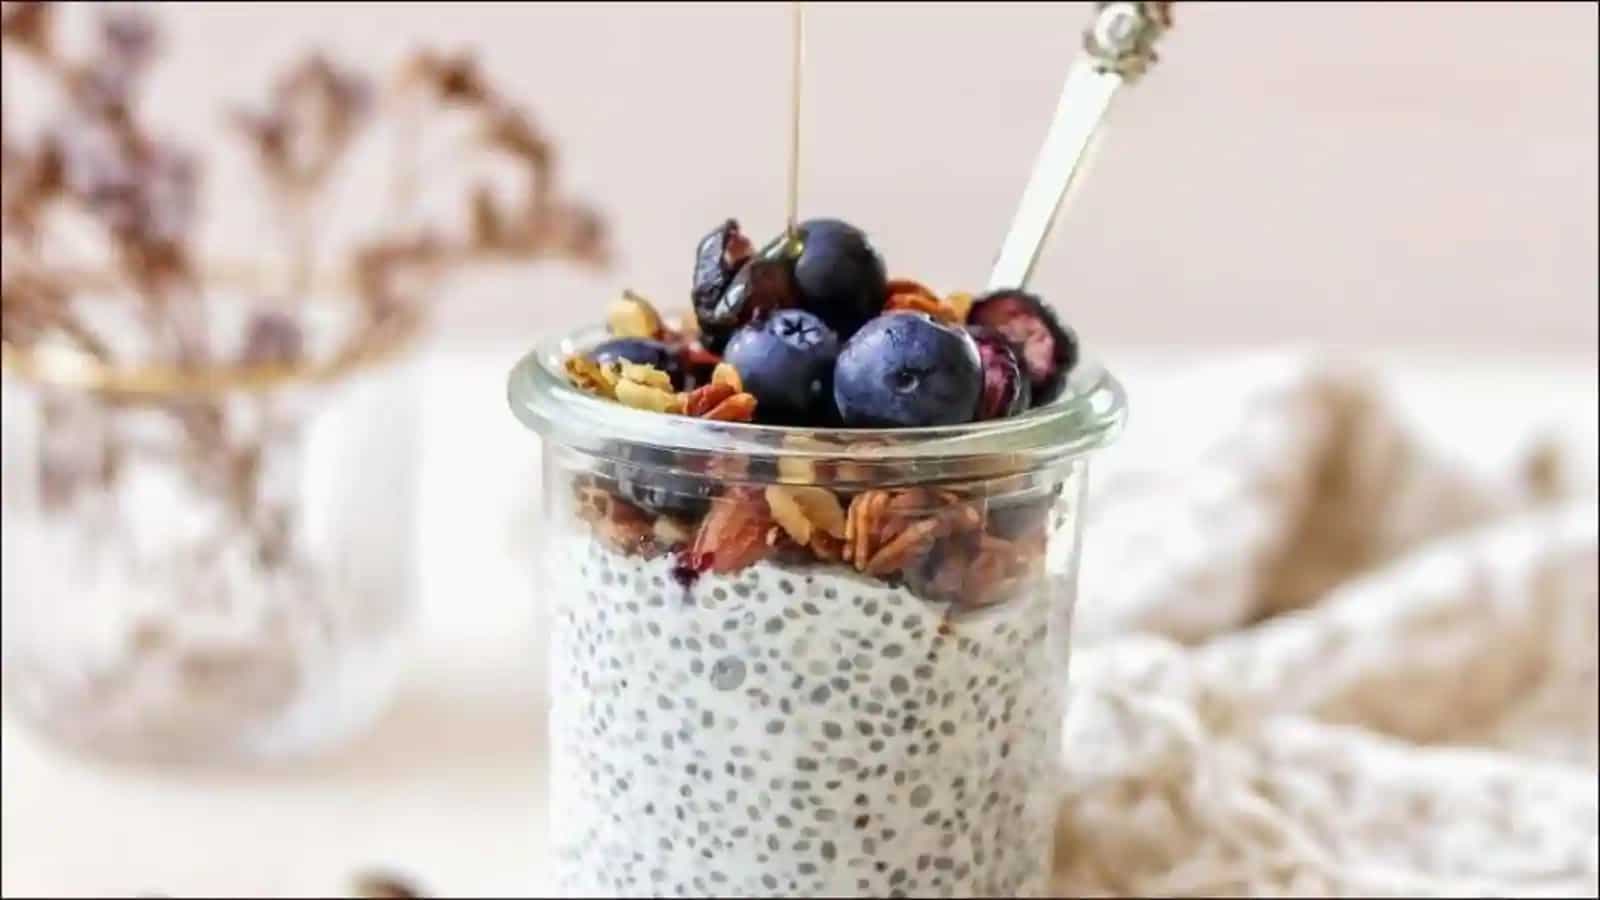 Recipe: Want a snack after work? Try classic and delicious chia seeds pudding